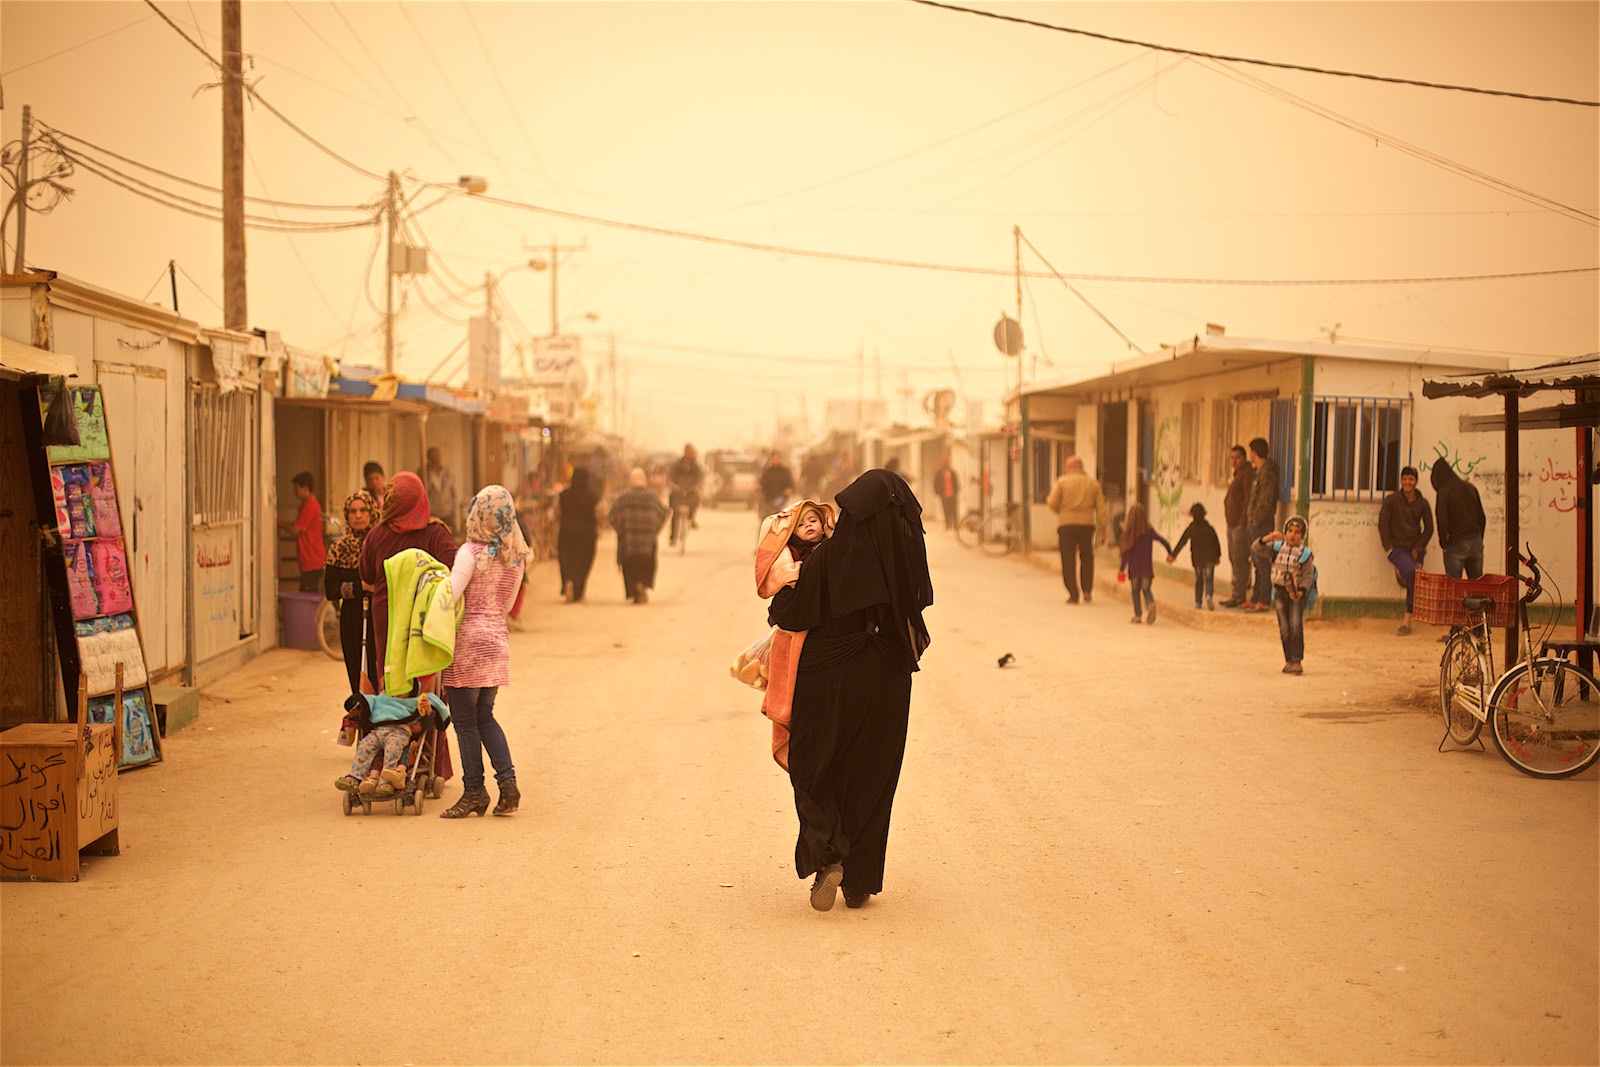  The weather situation in Zaatari is difficult for everyone, but especially for the little children who often suffer from lung-related diseases due to the frequent sand storms and the ever-present dust.&nbsp;(photo: Denis Bosnic) 